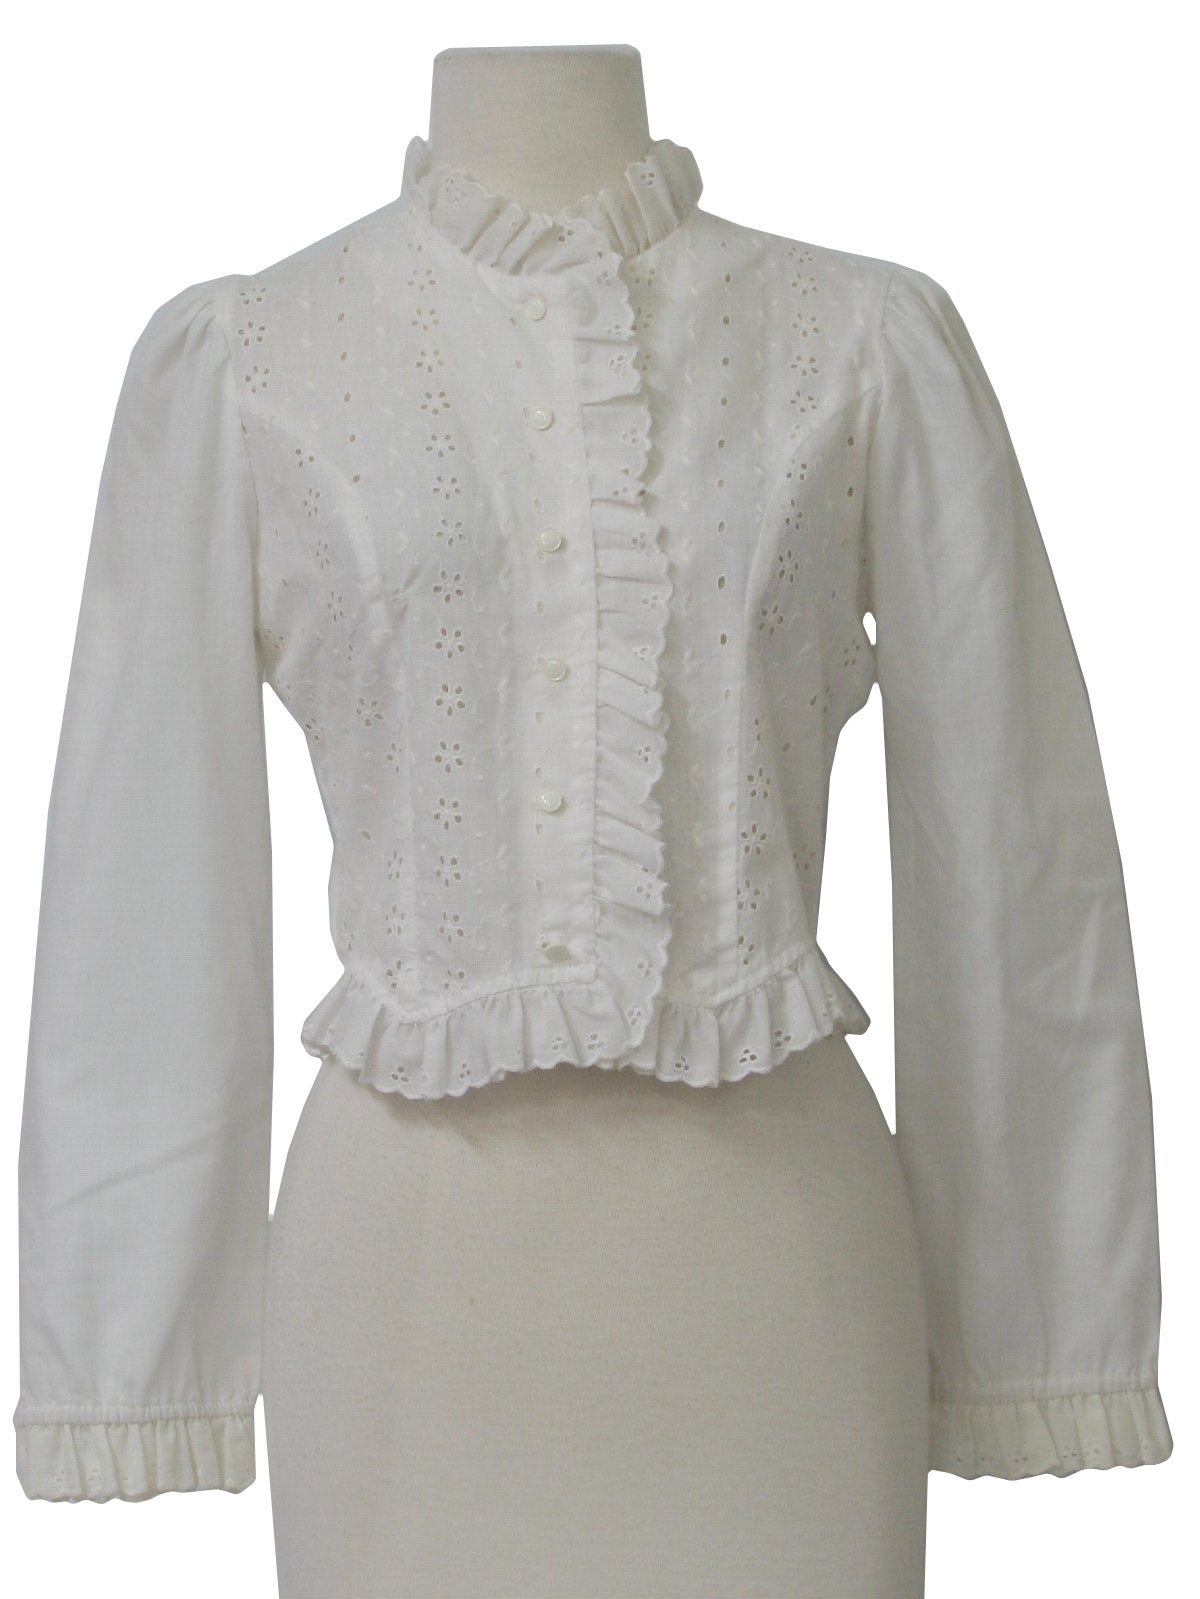 Vintage 1980's Shirt: Early 80s -Liberation- Womens white eyelet styled ...